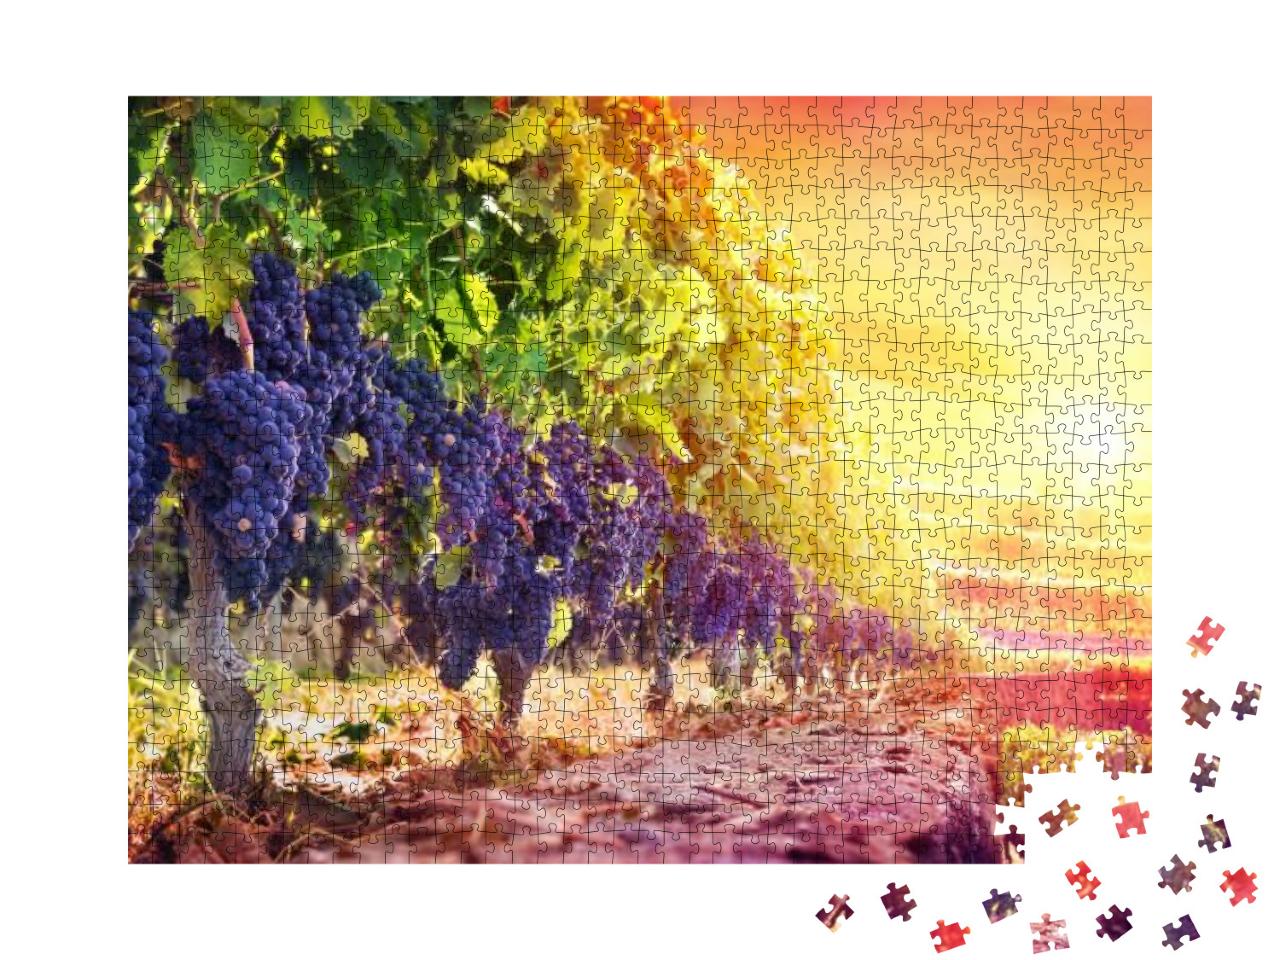 Ripe Grapes in Vineyard At Sunset - Harvest... Jigsaw Puzzle with 1000 pieces